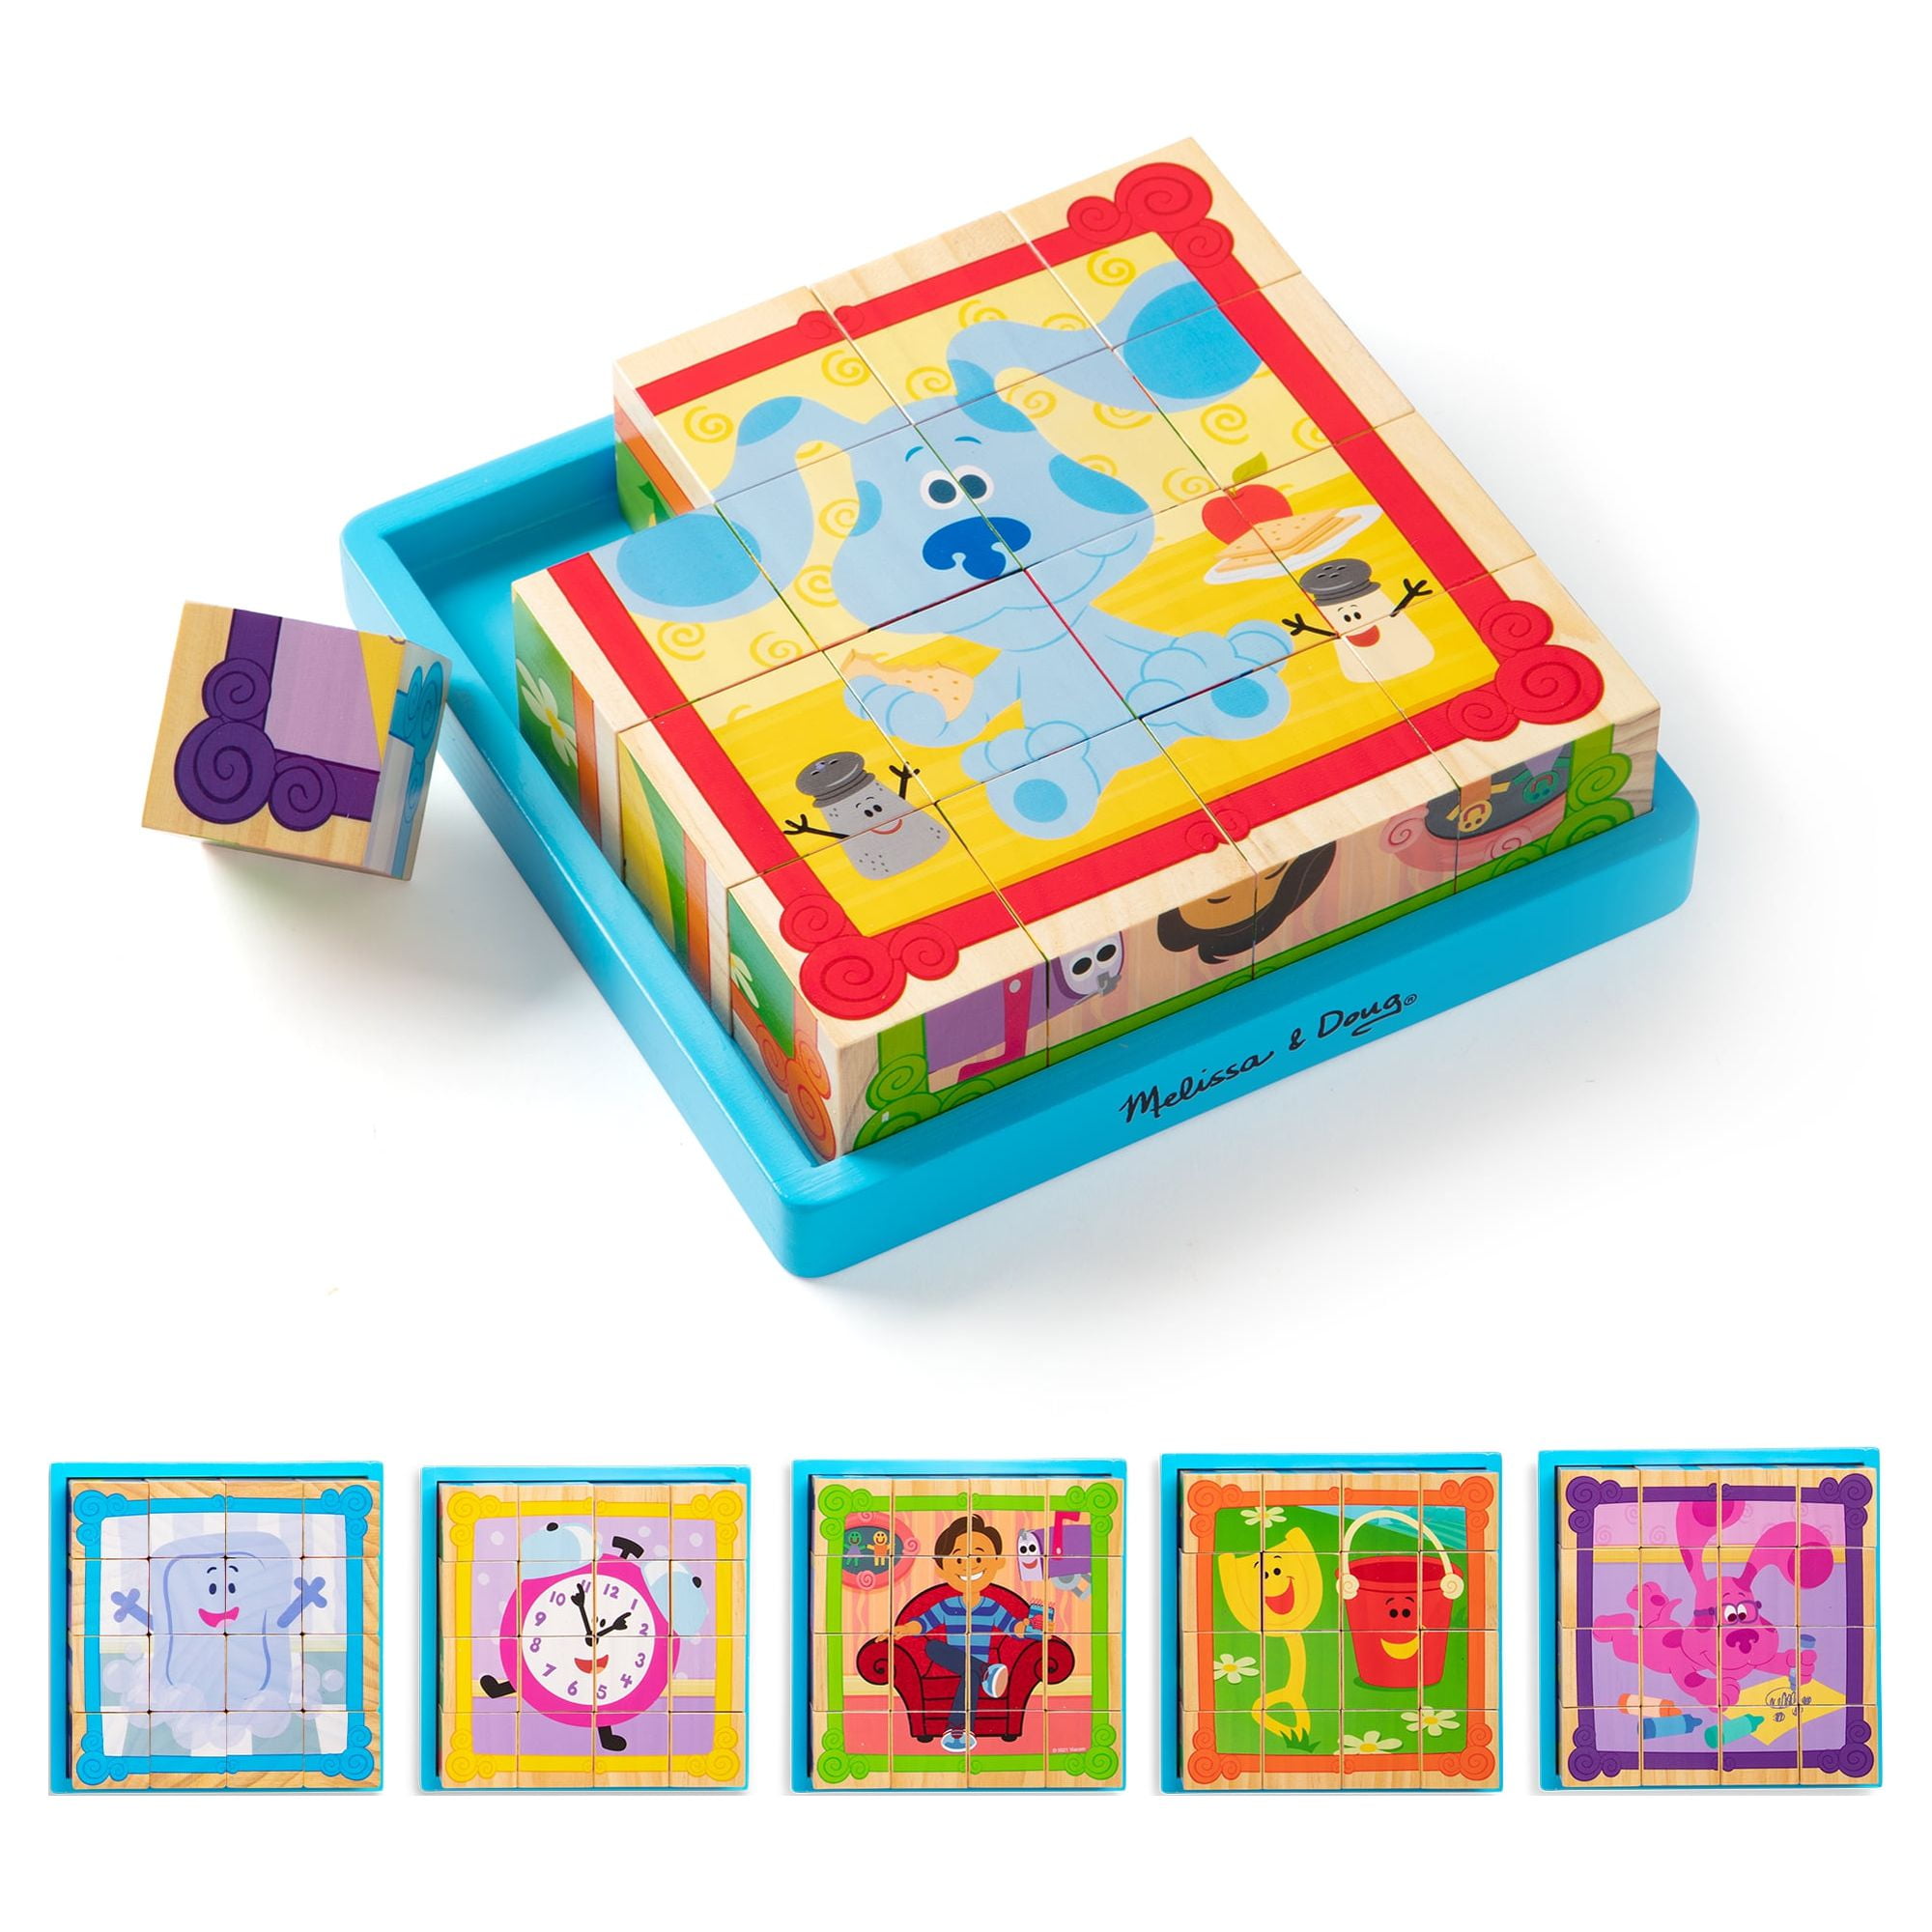 Melissa & Doug Painted Colored Puzzle Storage Case Holds 12